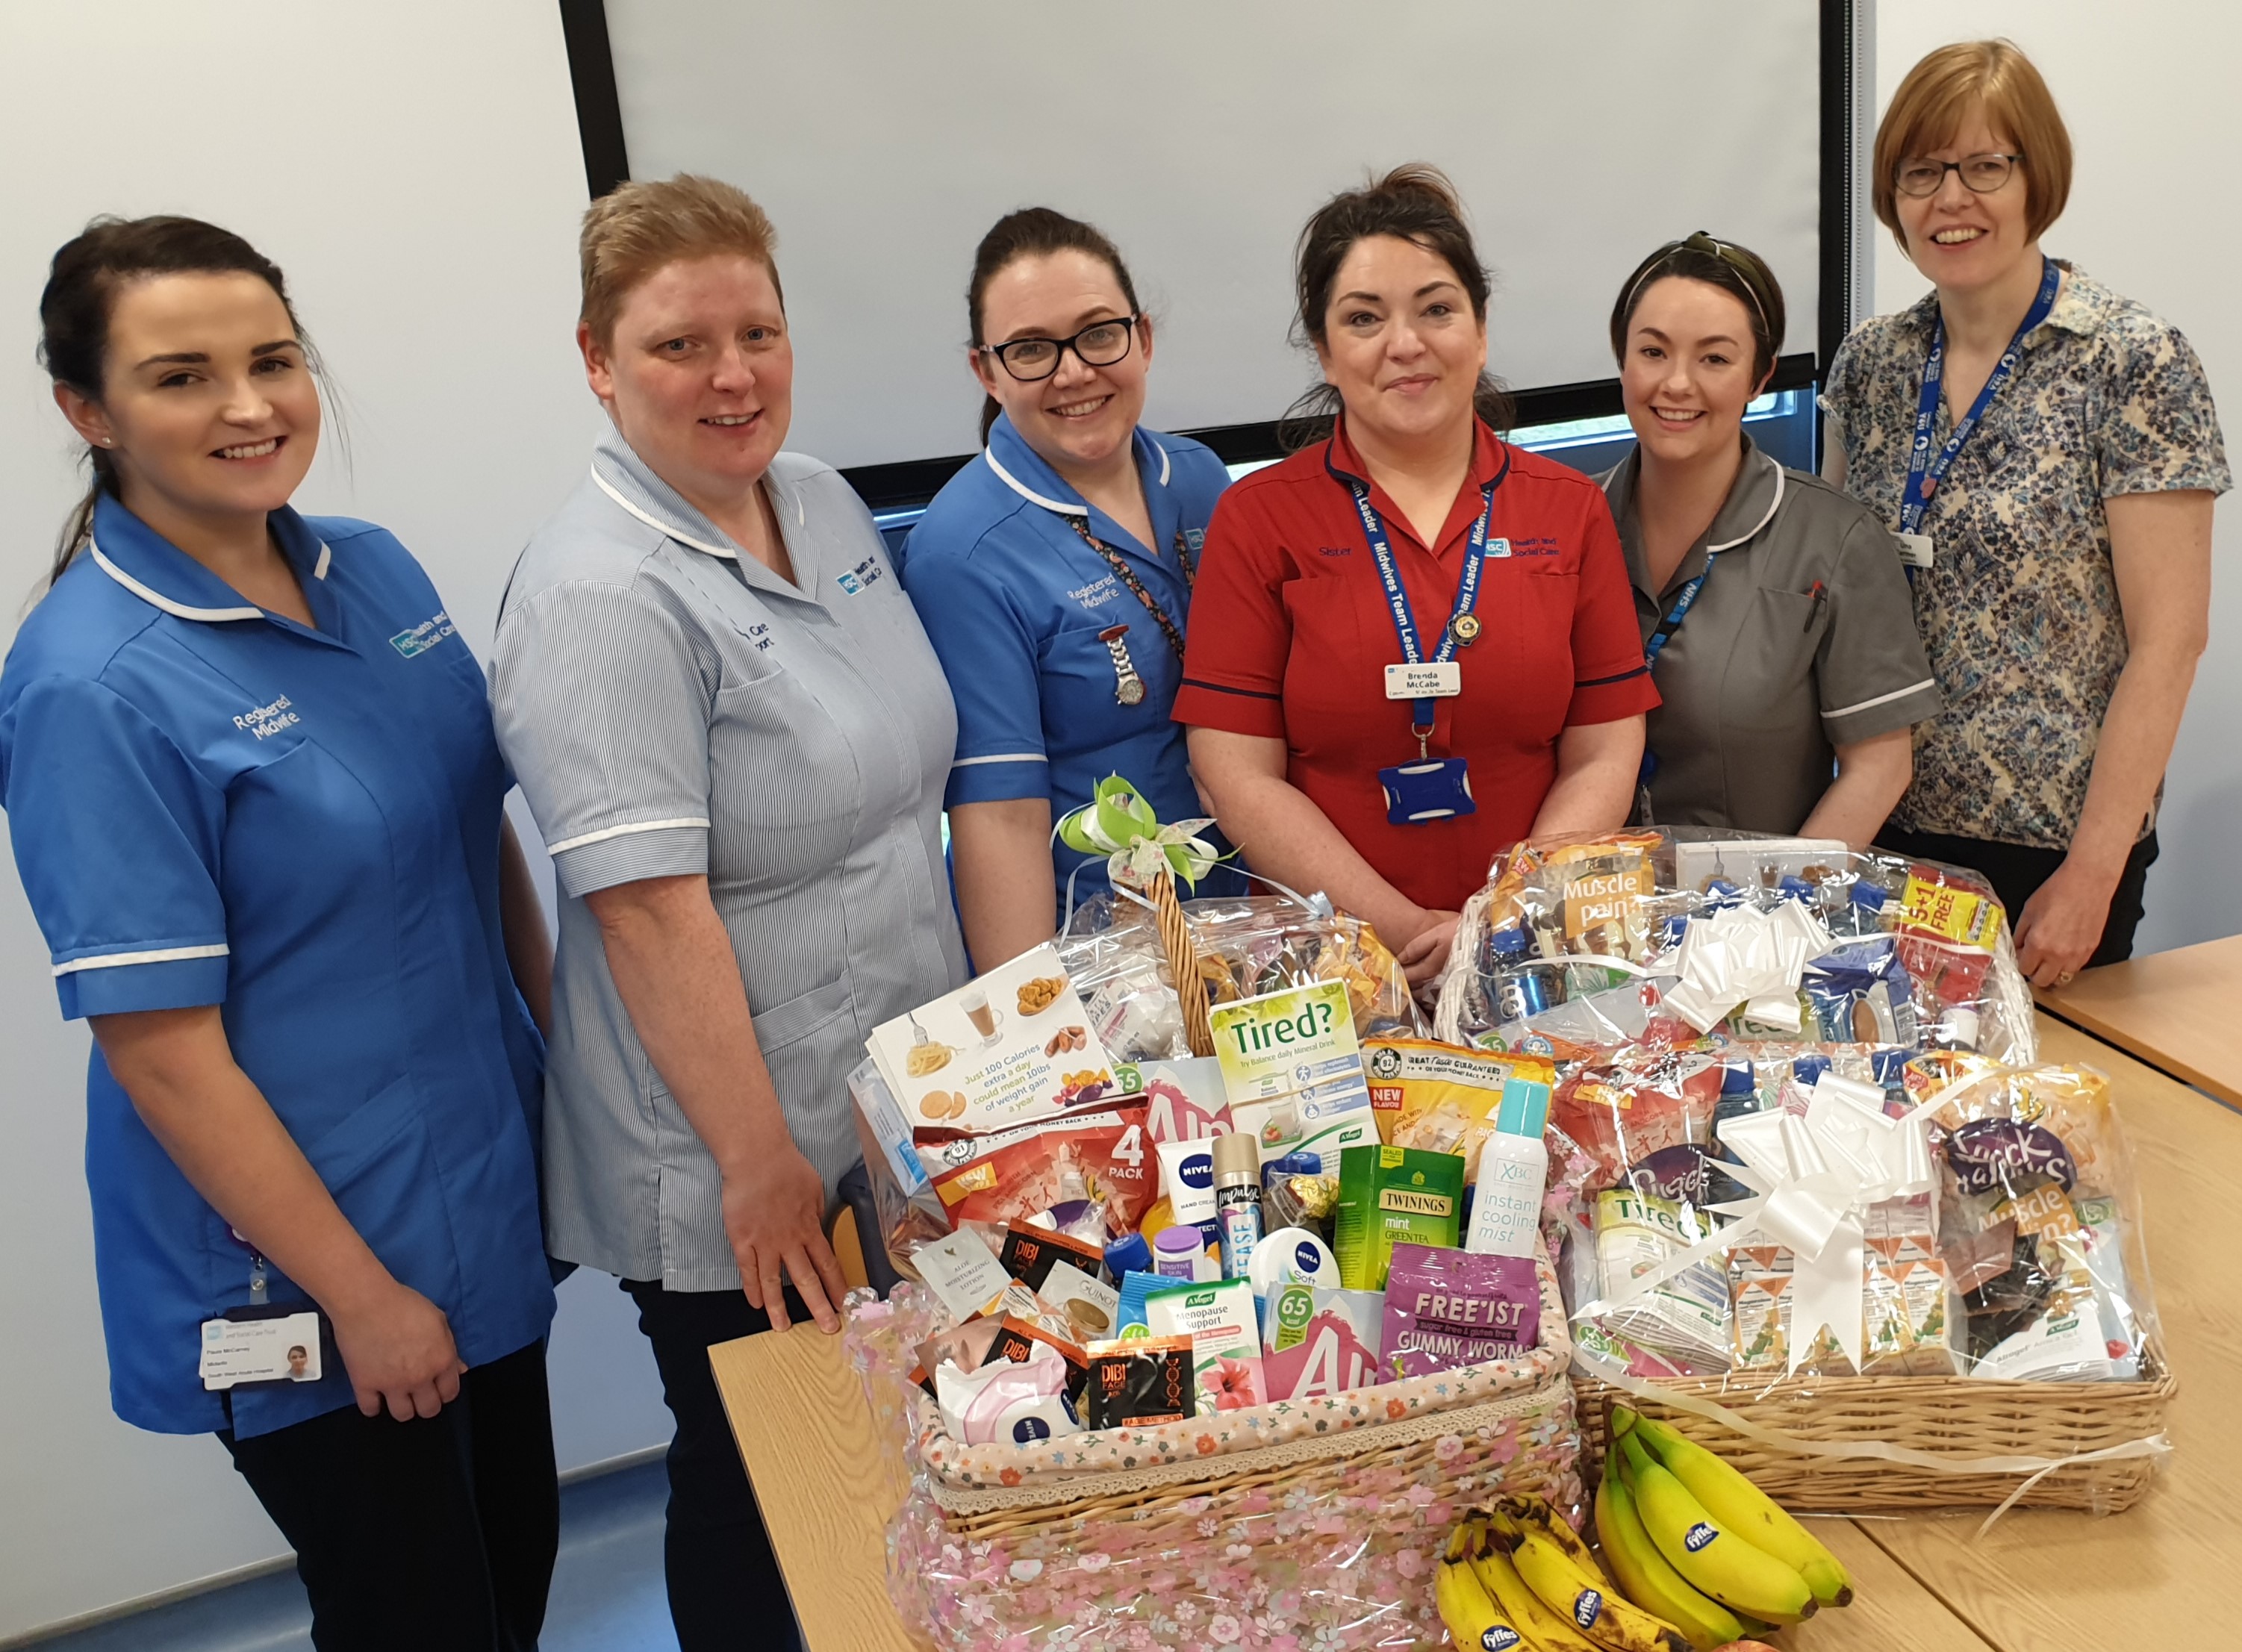 Maternity Staff welcome introduction of ‘The Staff Refuel Pitstop’ for ...